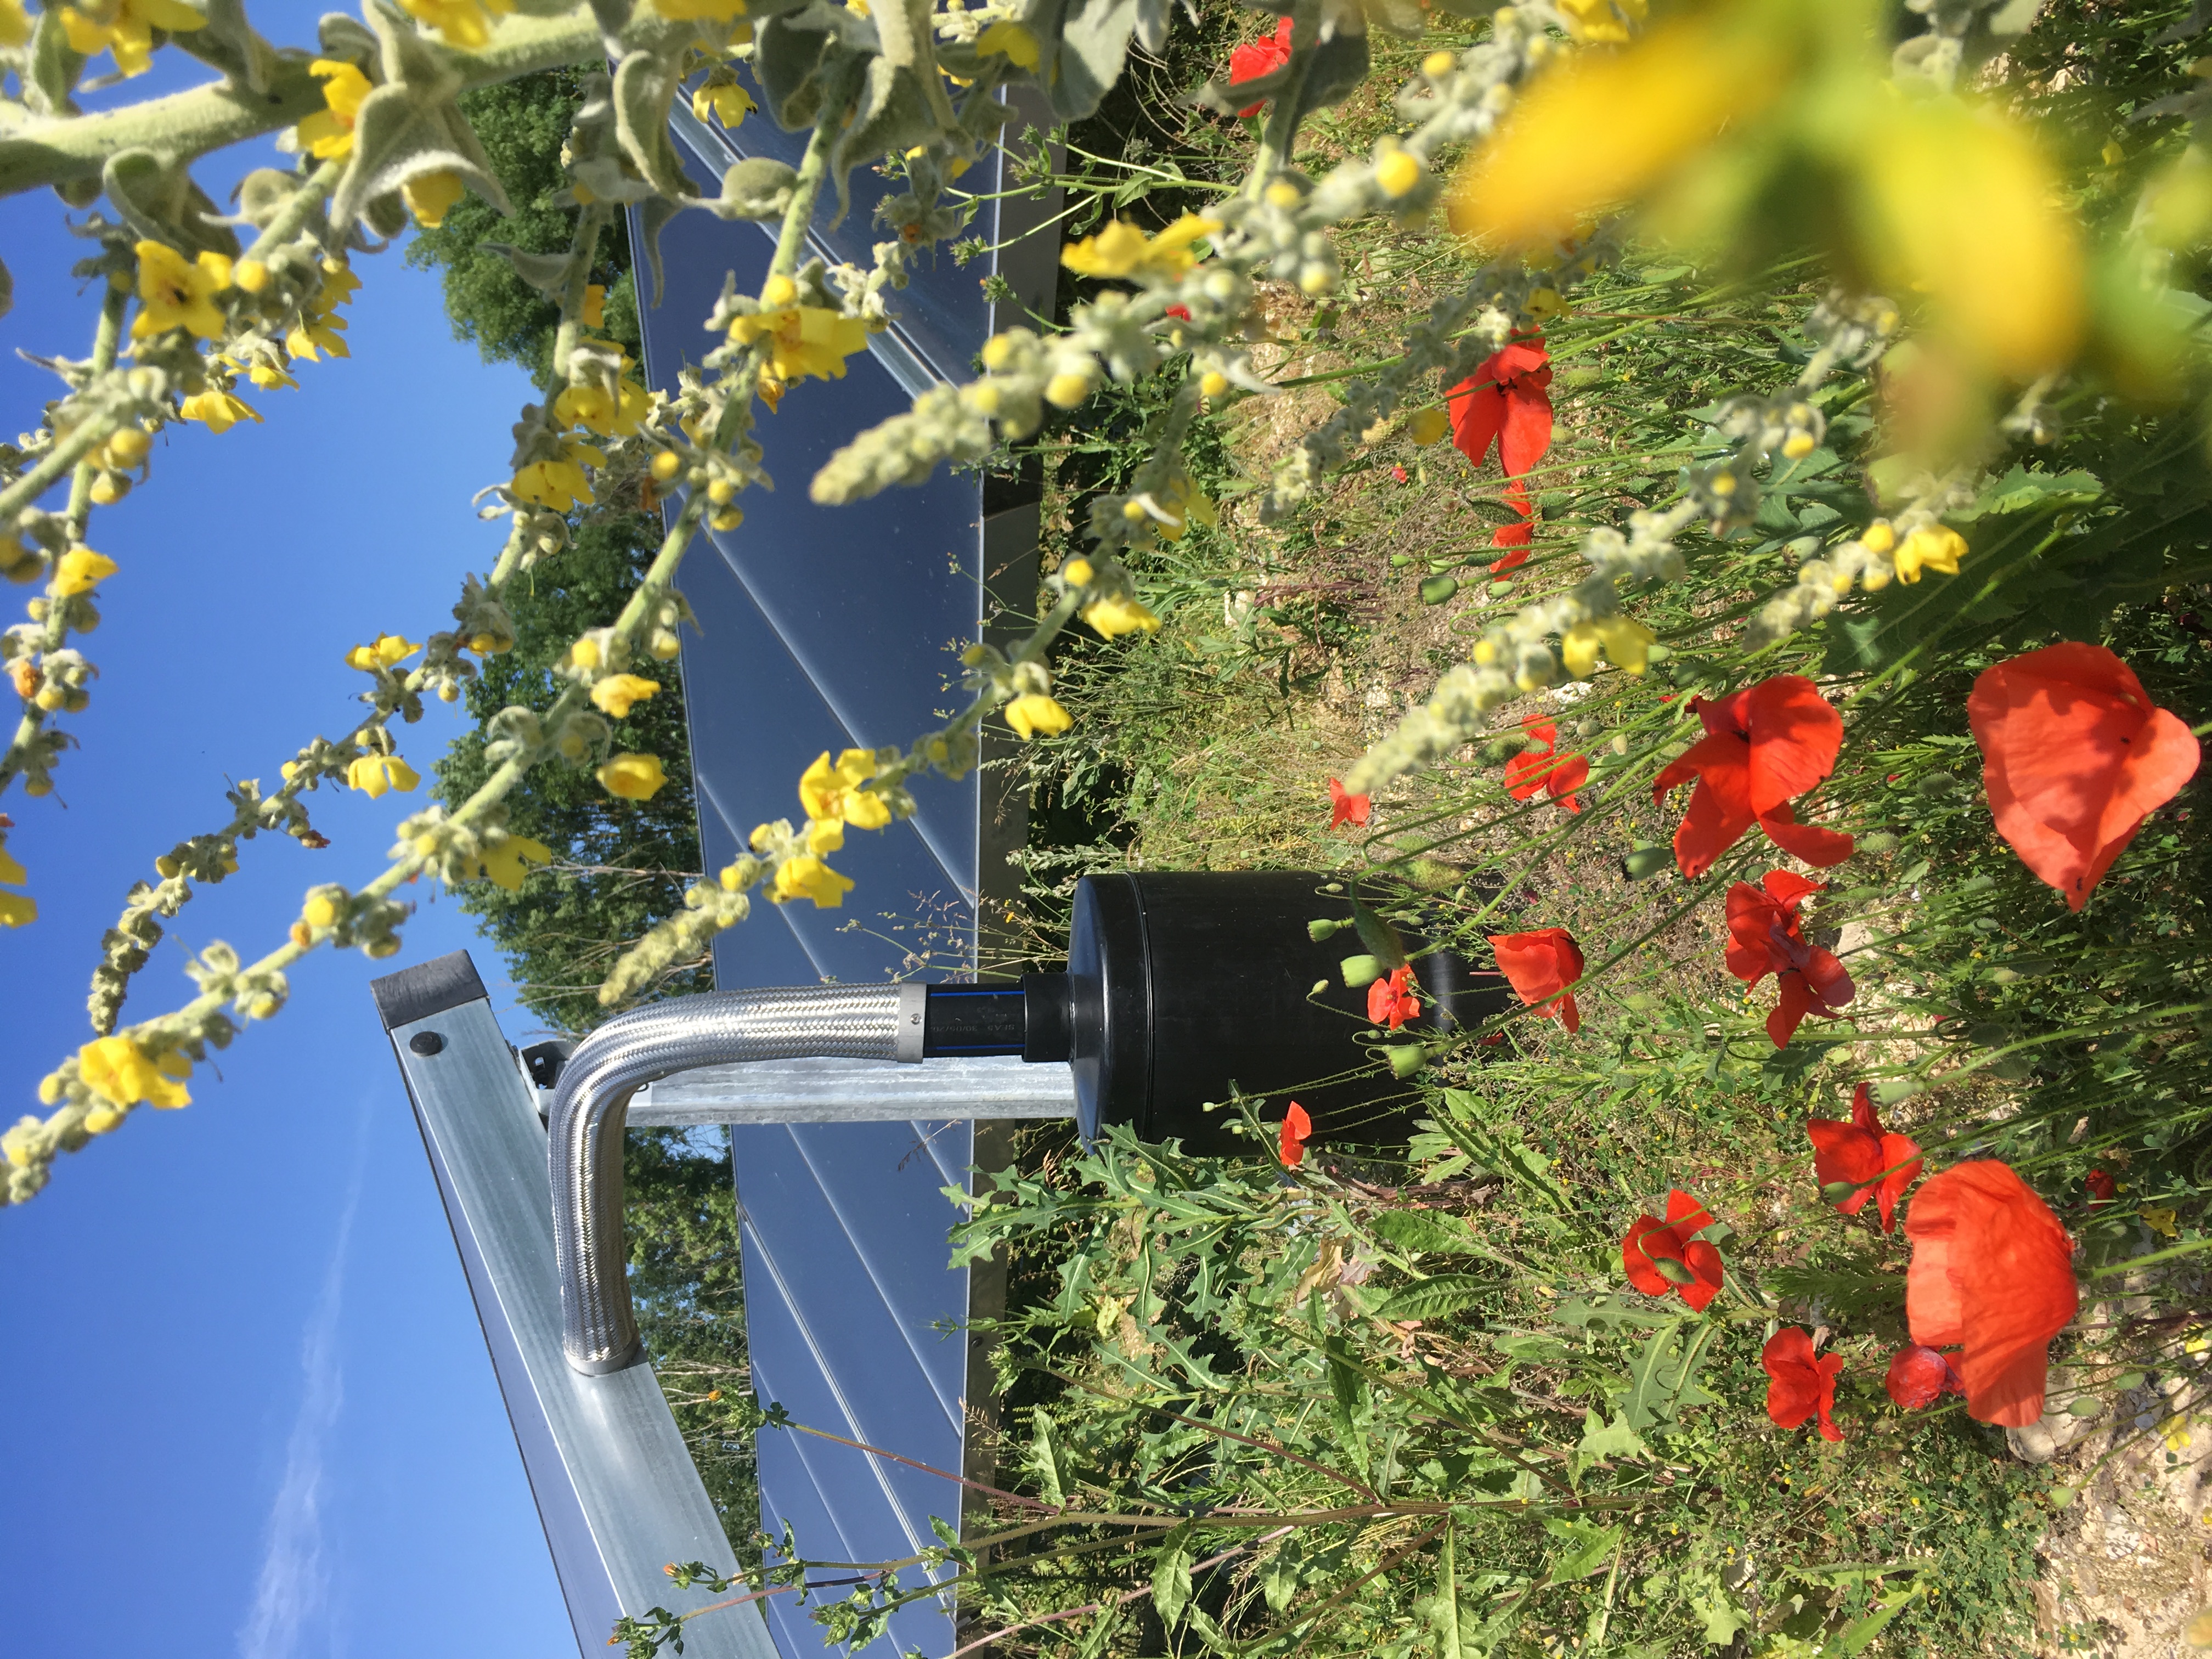 Solar panels in a field with flowers